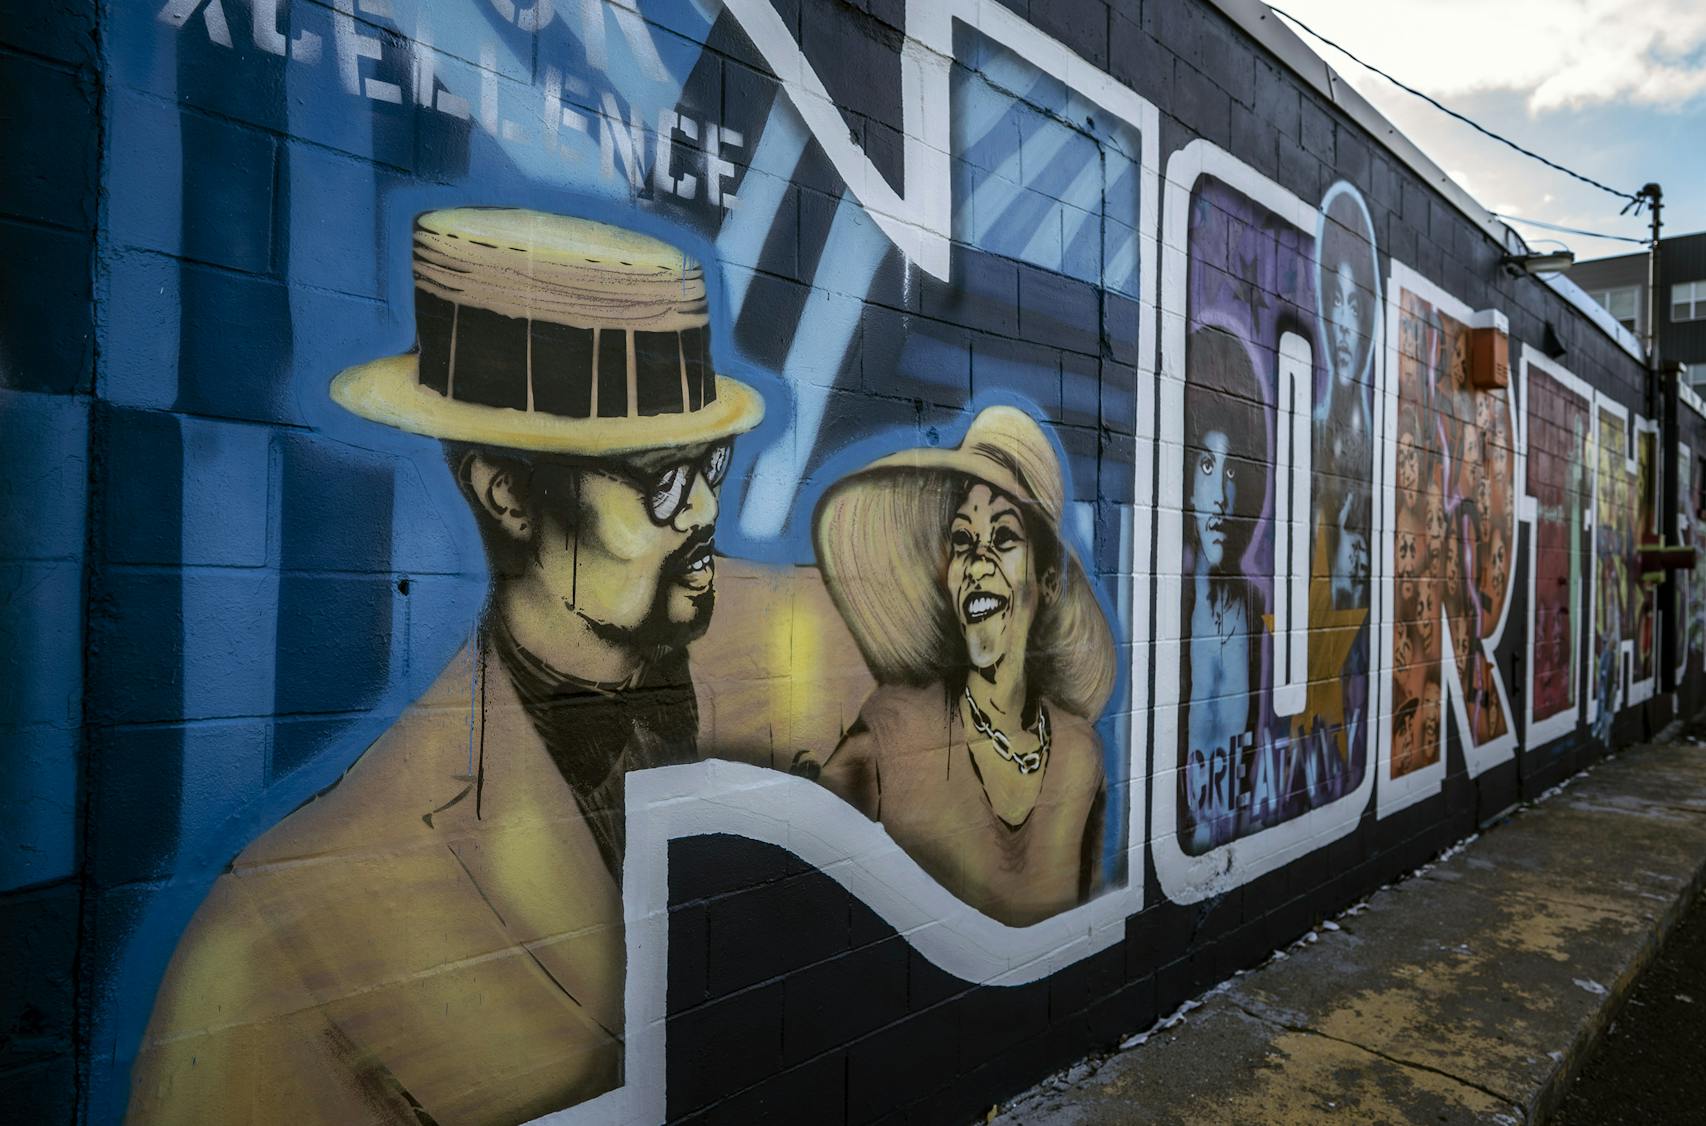 His newest and most personal mural features faces familiar to North Side residents, including Houston White and his late wife, Donise (pictured inside the 